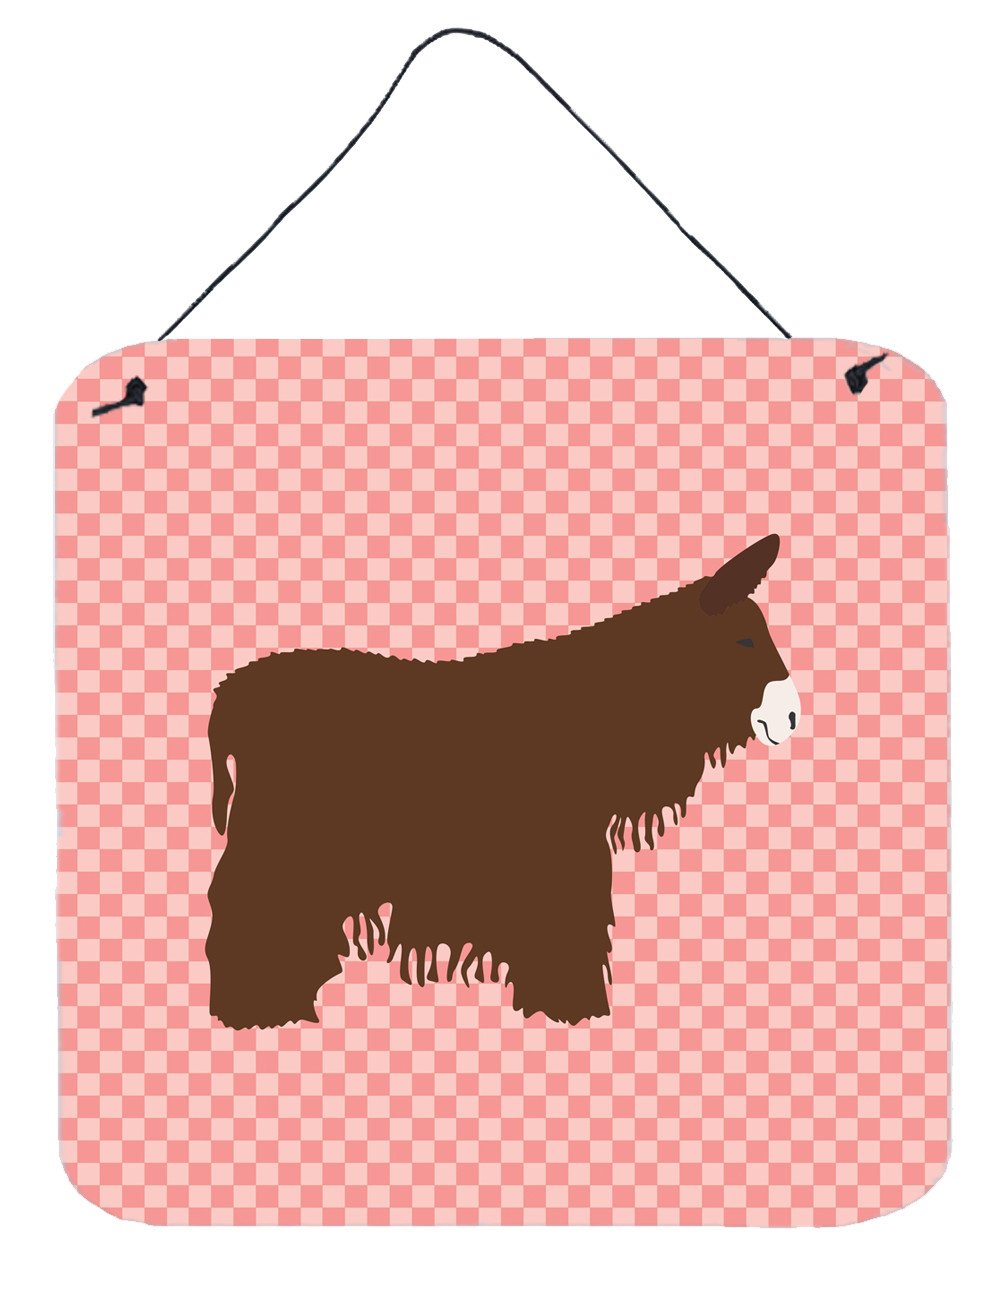 Poitou Poiteuin Donkey Pink Check Wall or Door Hanging Prints BB7852DS66 by Caroline's Treasures